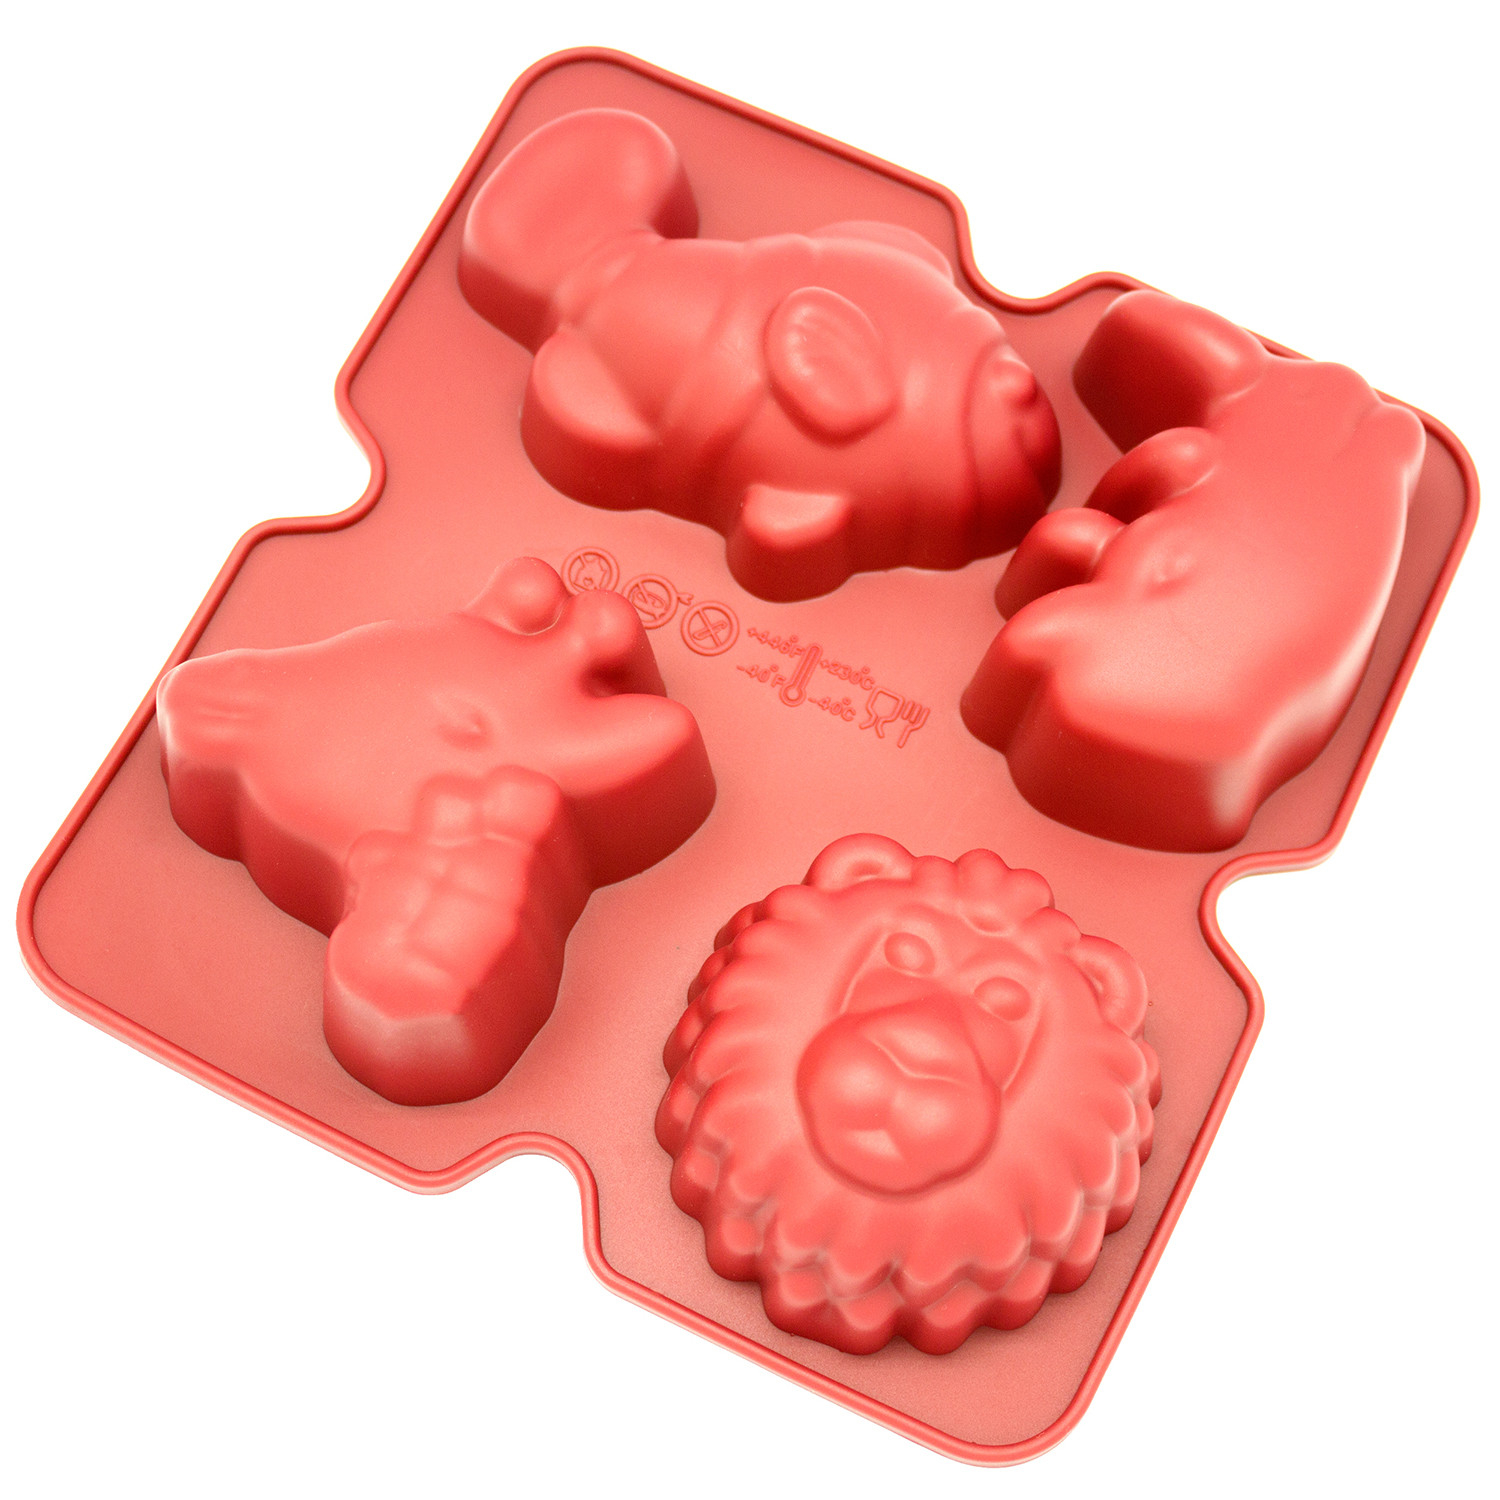 Freshware Silicone Mold, Soap Mold for Pudding, Muffin, Cupcake, Cheesecake and Soap, Lion, Giraffe, Rhino and Fish, 4-Cavity